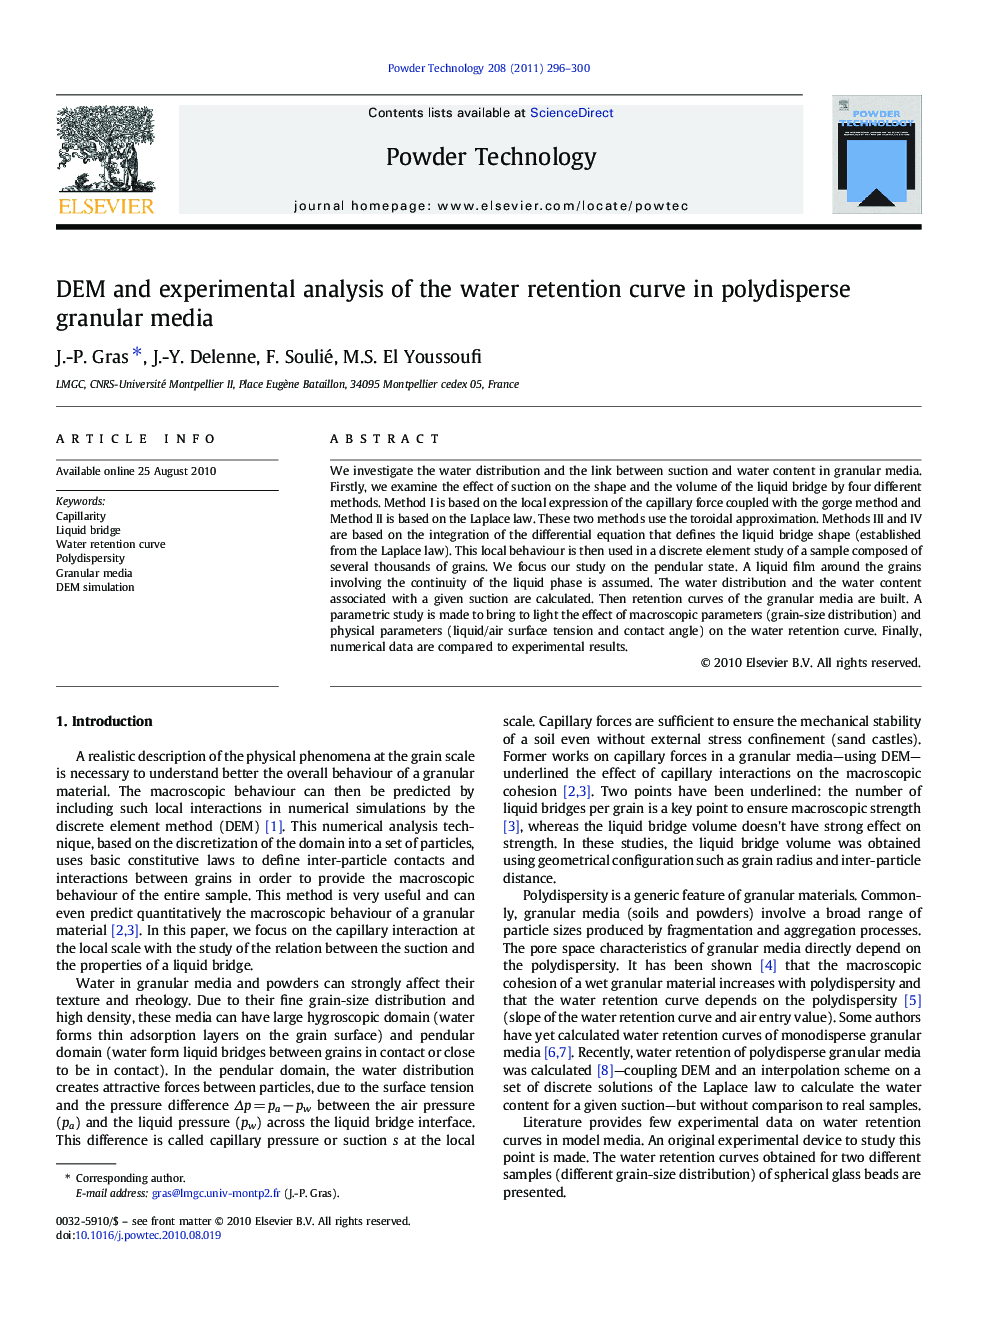 DEM and experimental analysis of the water retention curve in polydisperse granular media